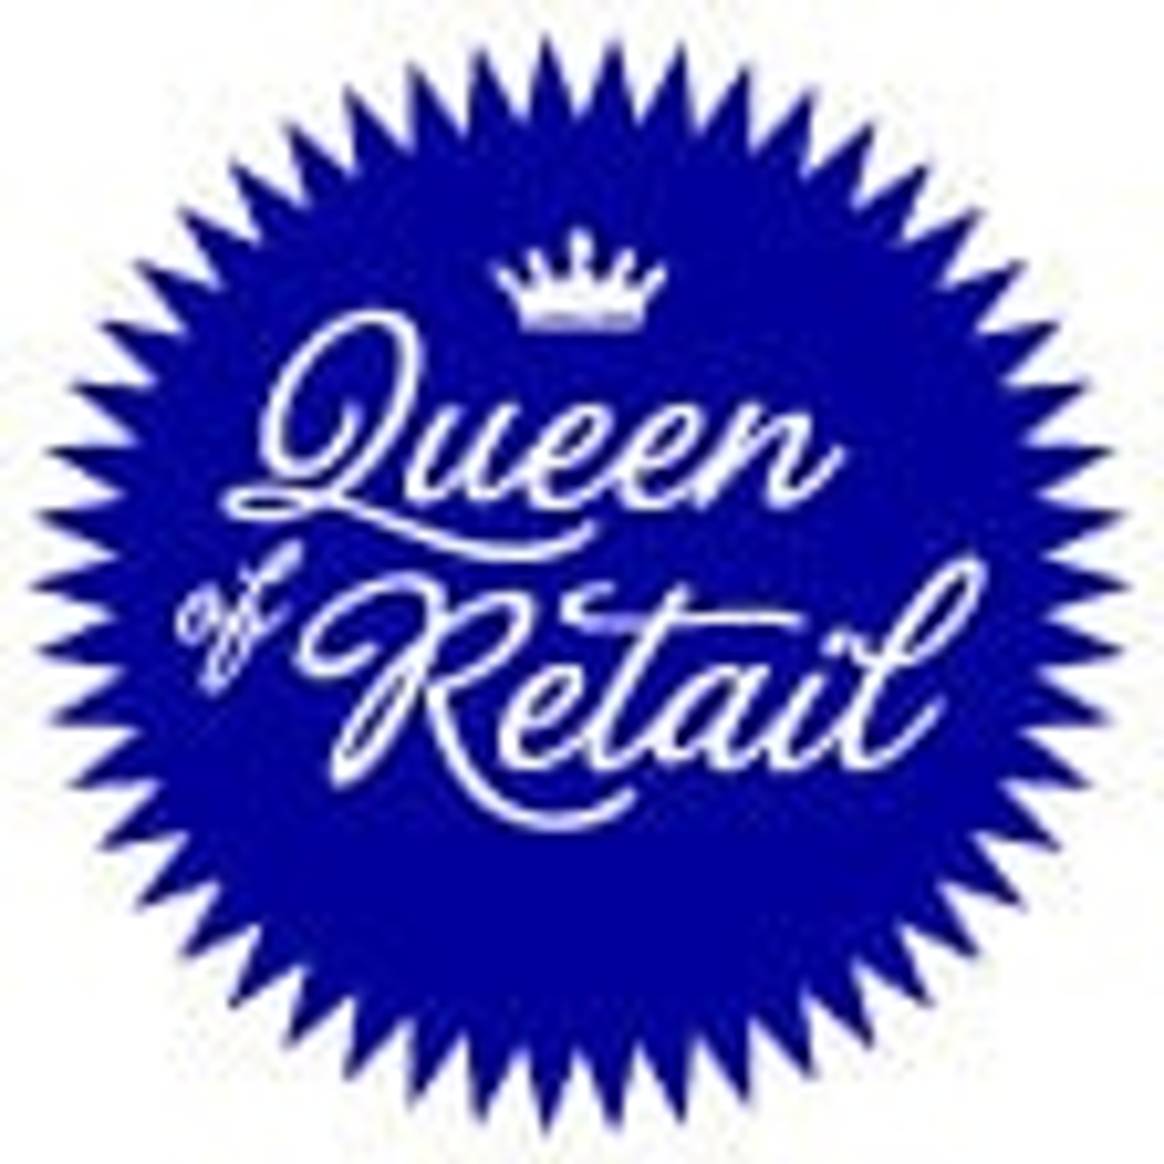 Queen of Retail loves 'Raw Retail'